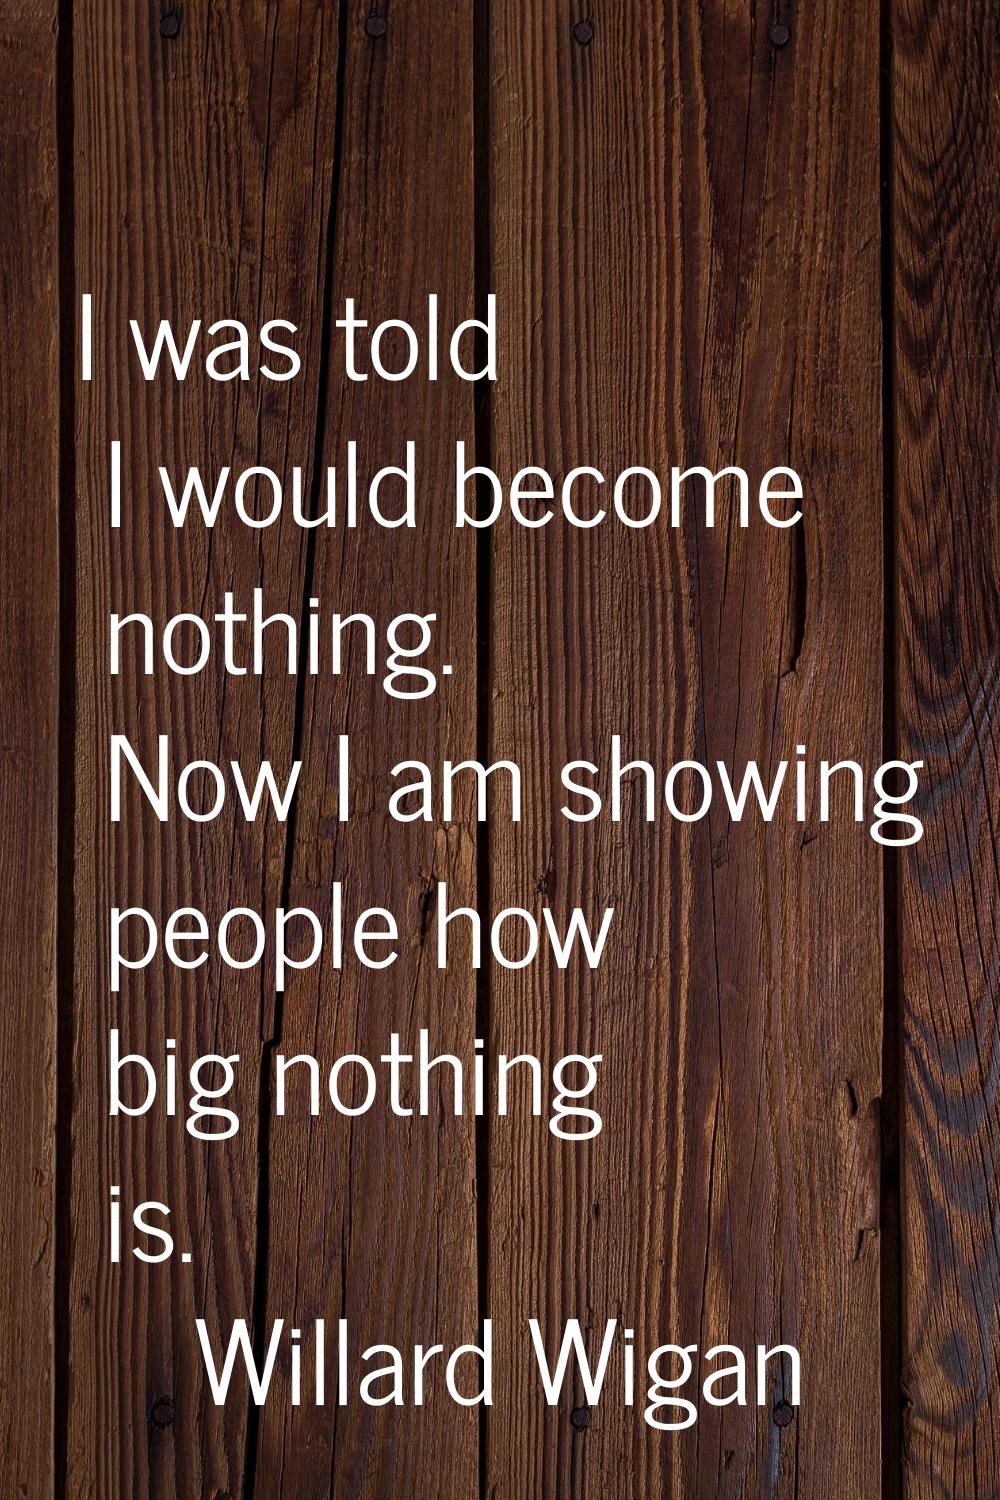 I was told I would become nothing. Now I am showing people how big nothing is.